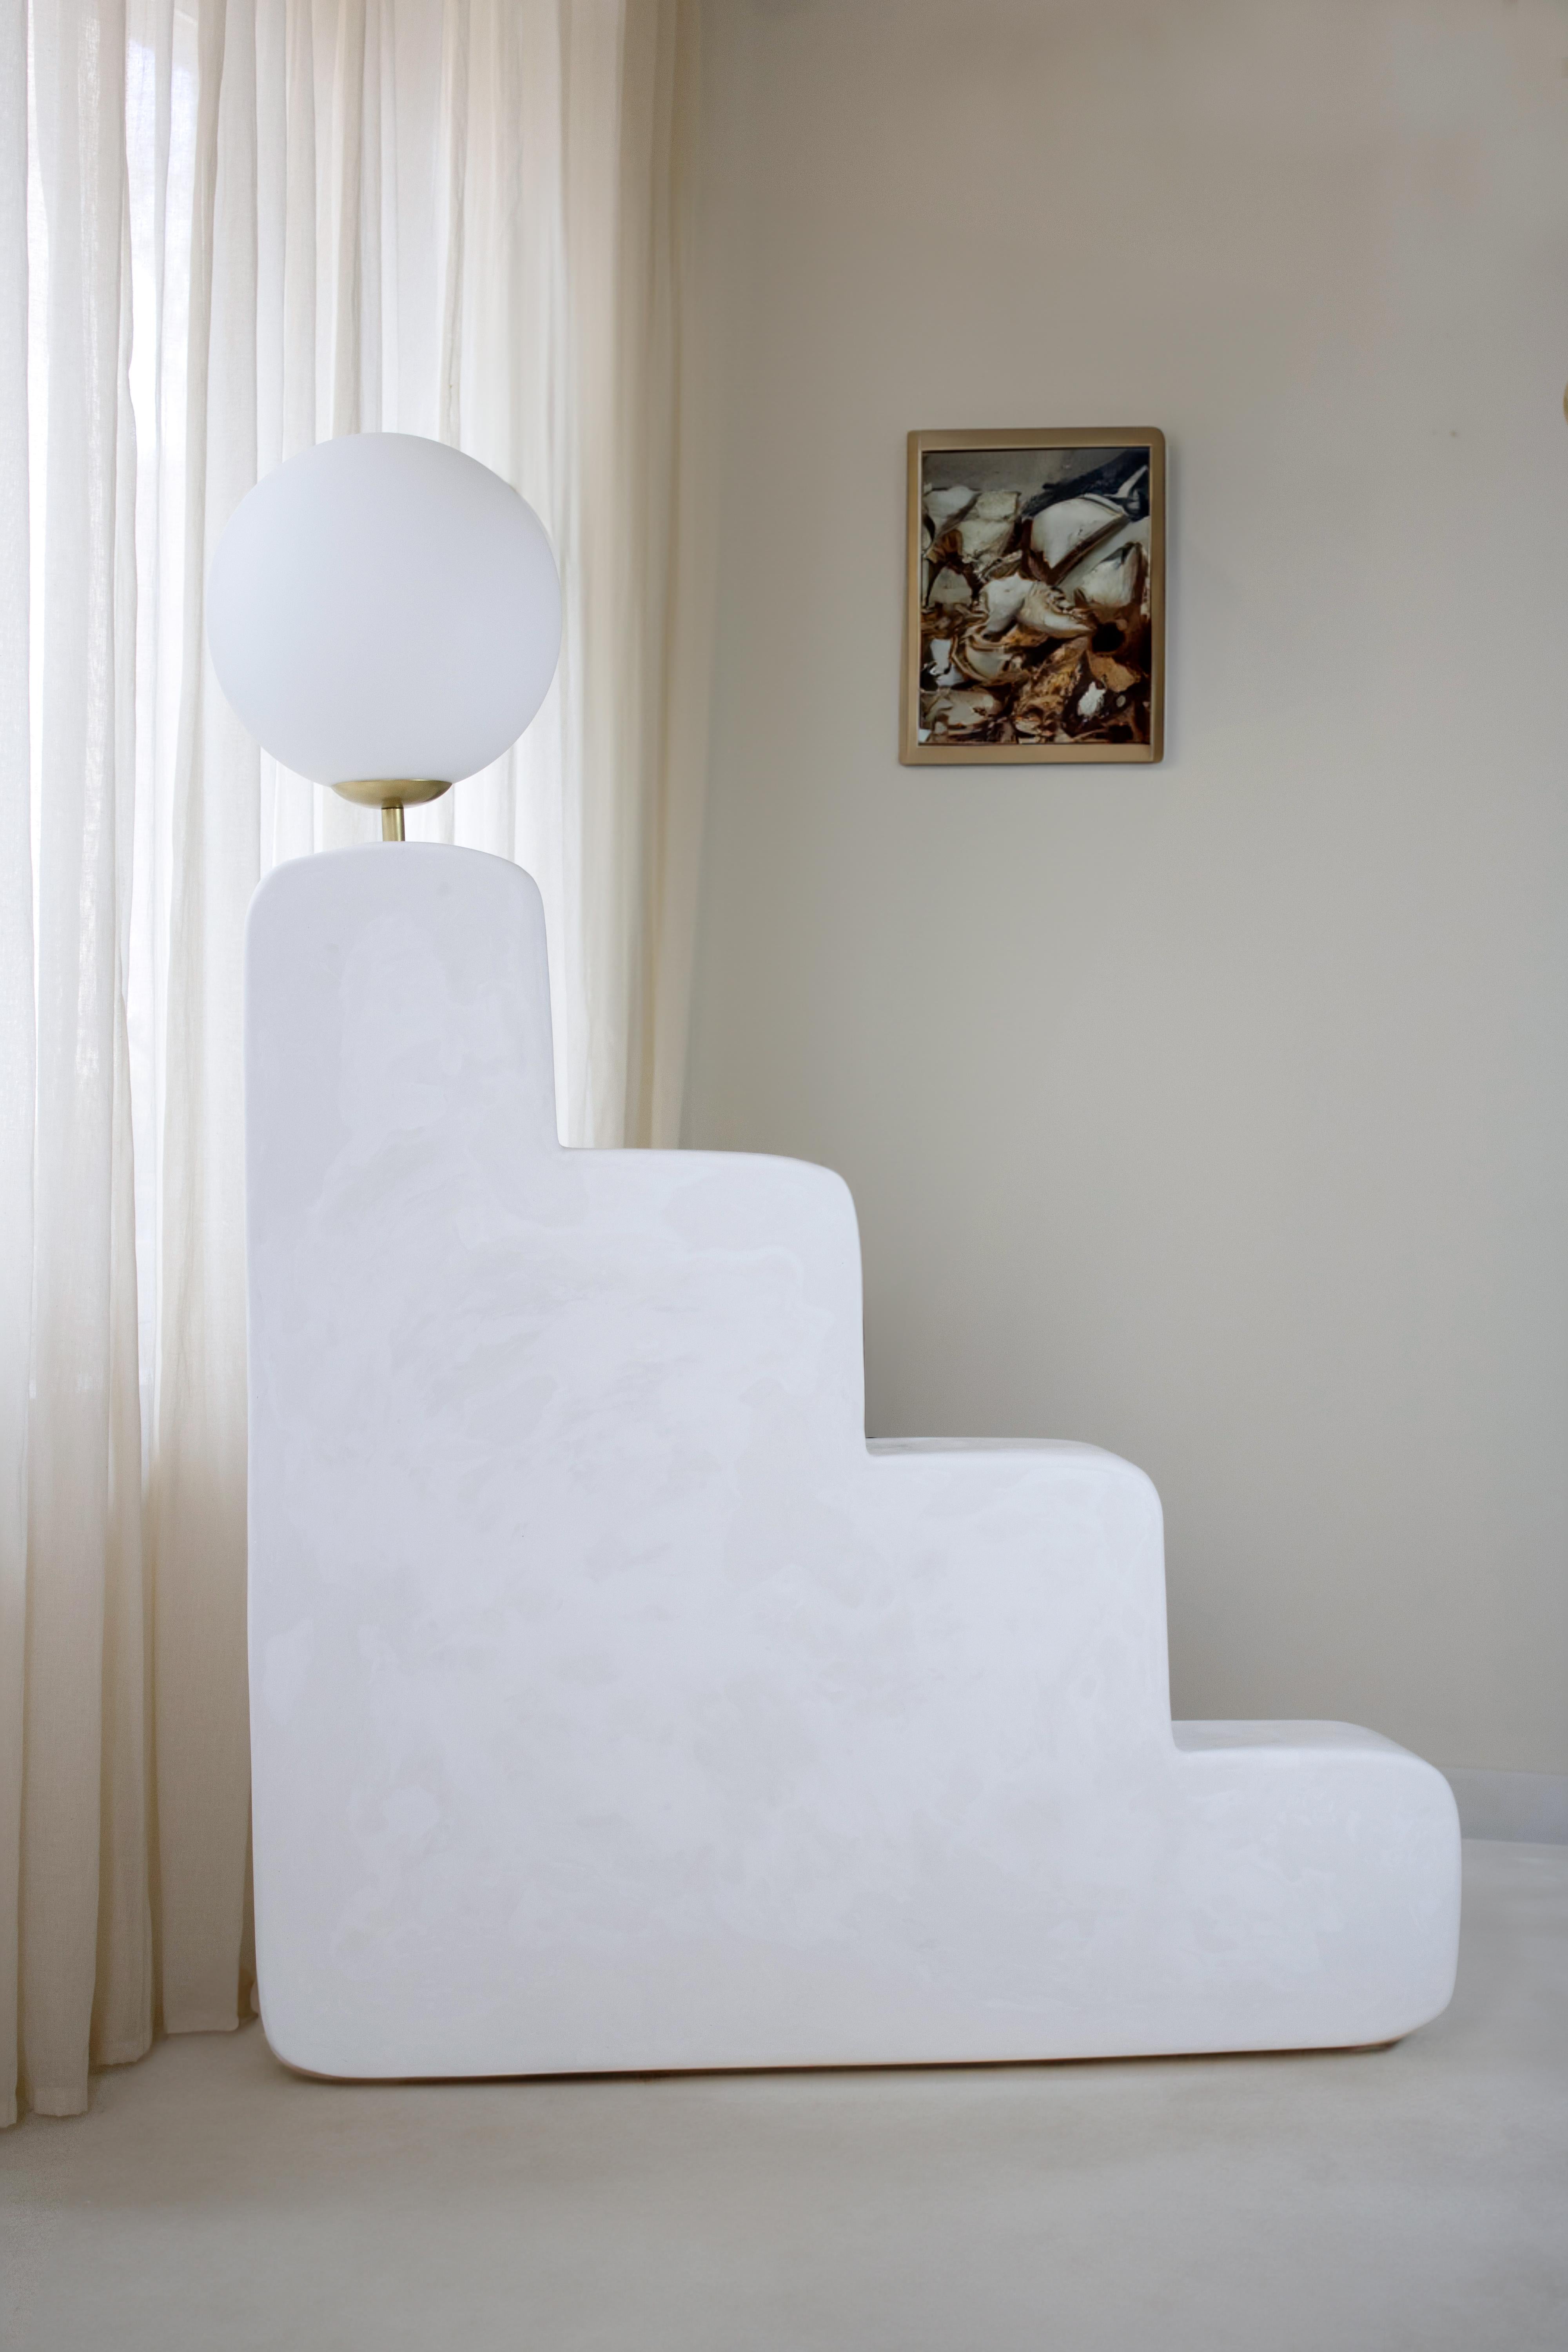 Big Step Lamp is a contemporary handmade lamp from the Forms Collection, made in gypsum. The sculpture’s form alludes to ambition and enlightenment in a playful way. The lamp’s smooth, organic curves invites the viewer to explore its surface with